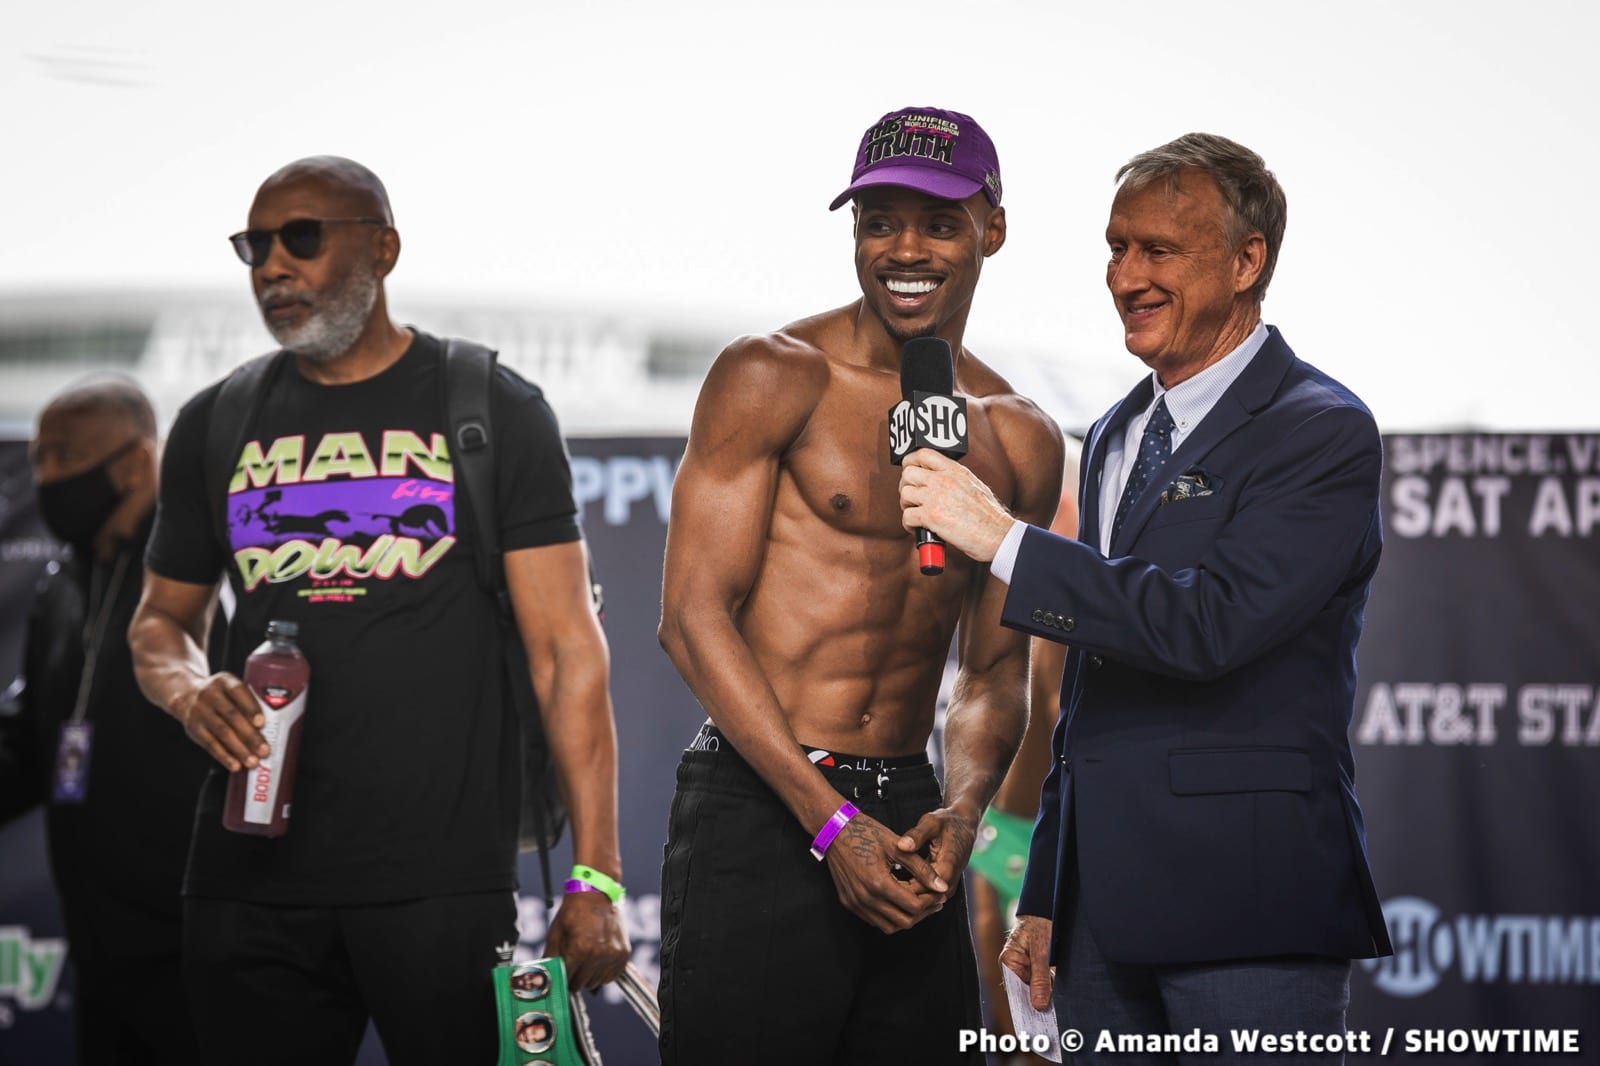 Image: Jaron Ennis says Spence won't return to 147 if he fights Thurman at 154